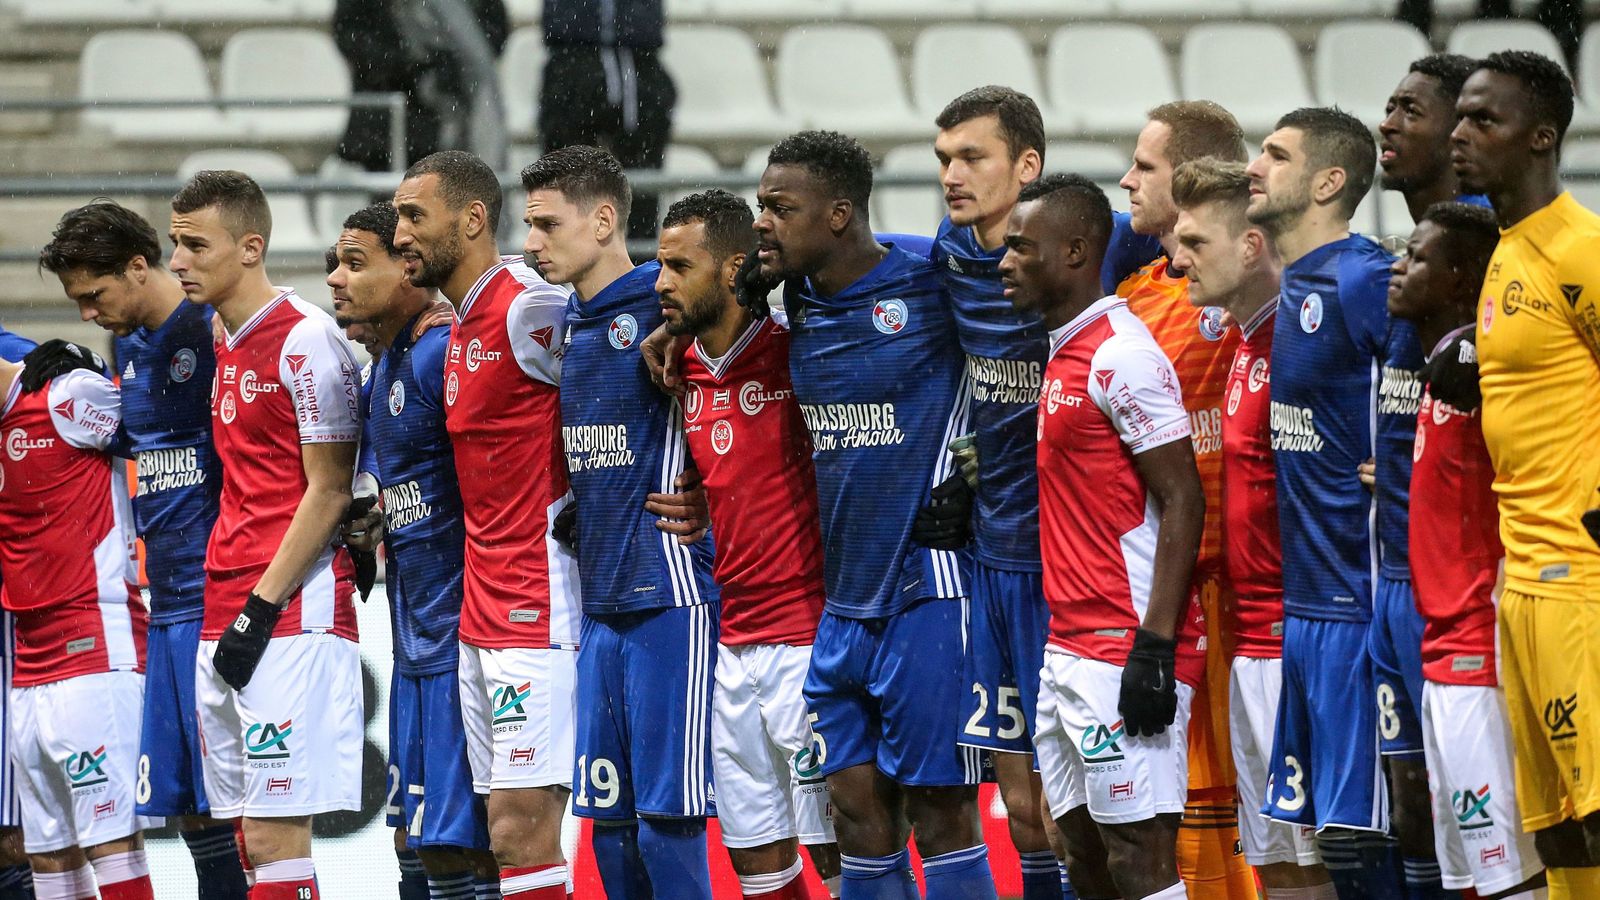 Ligue 1 round-up: Strasbourg lose on sombre day at Reims | Football ...